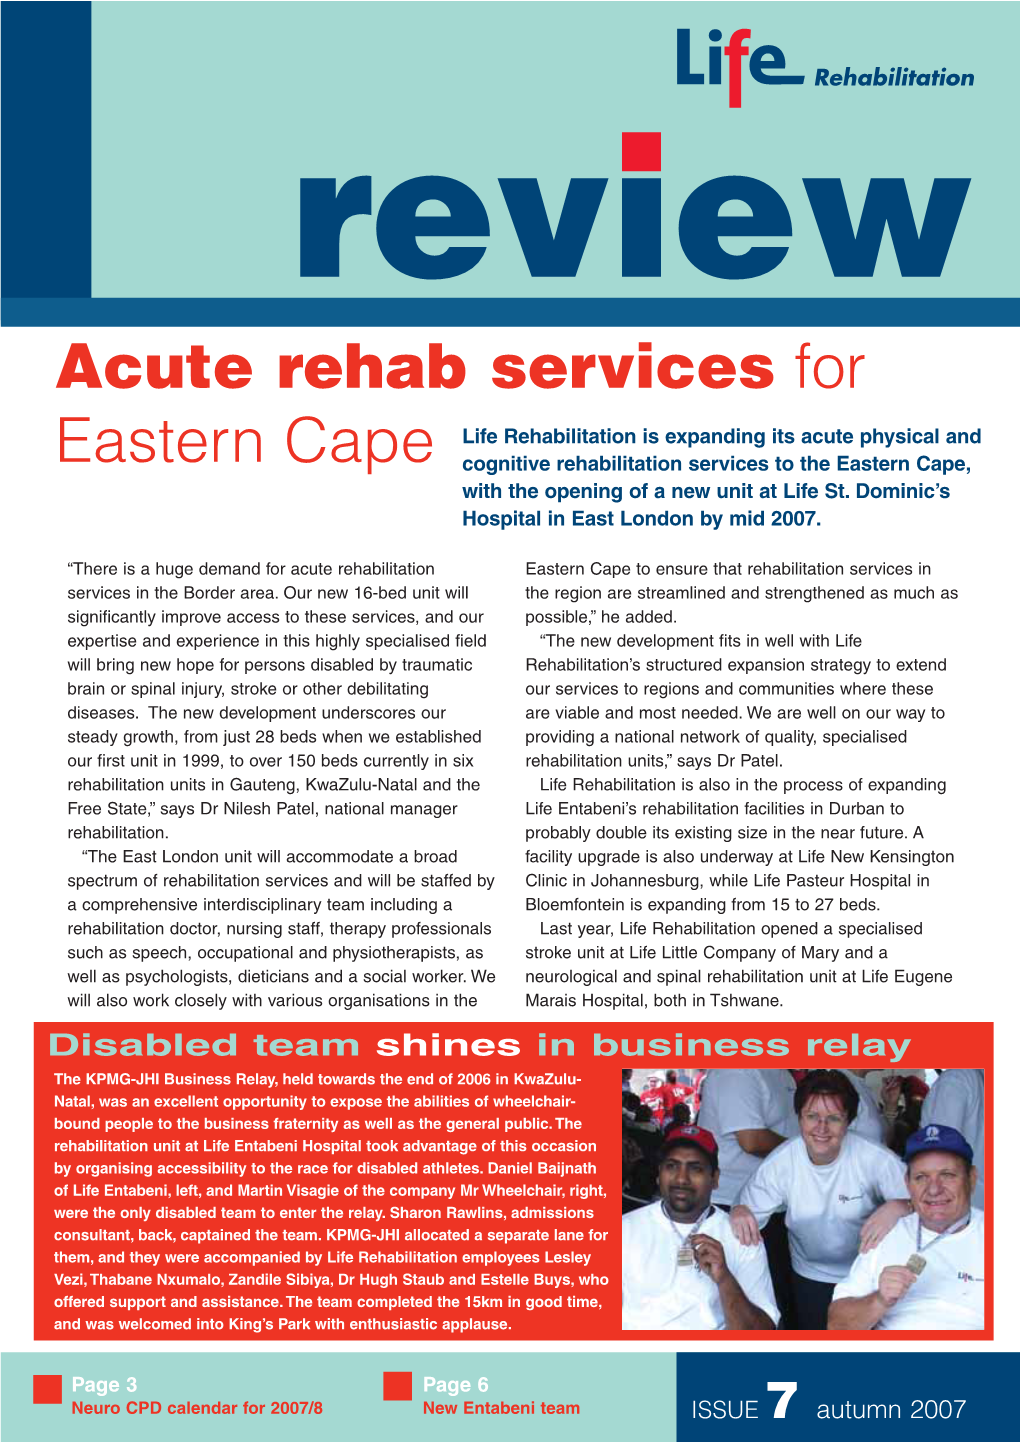 Acute Rehab Services for Eastern Cape